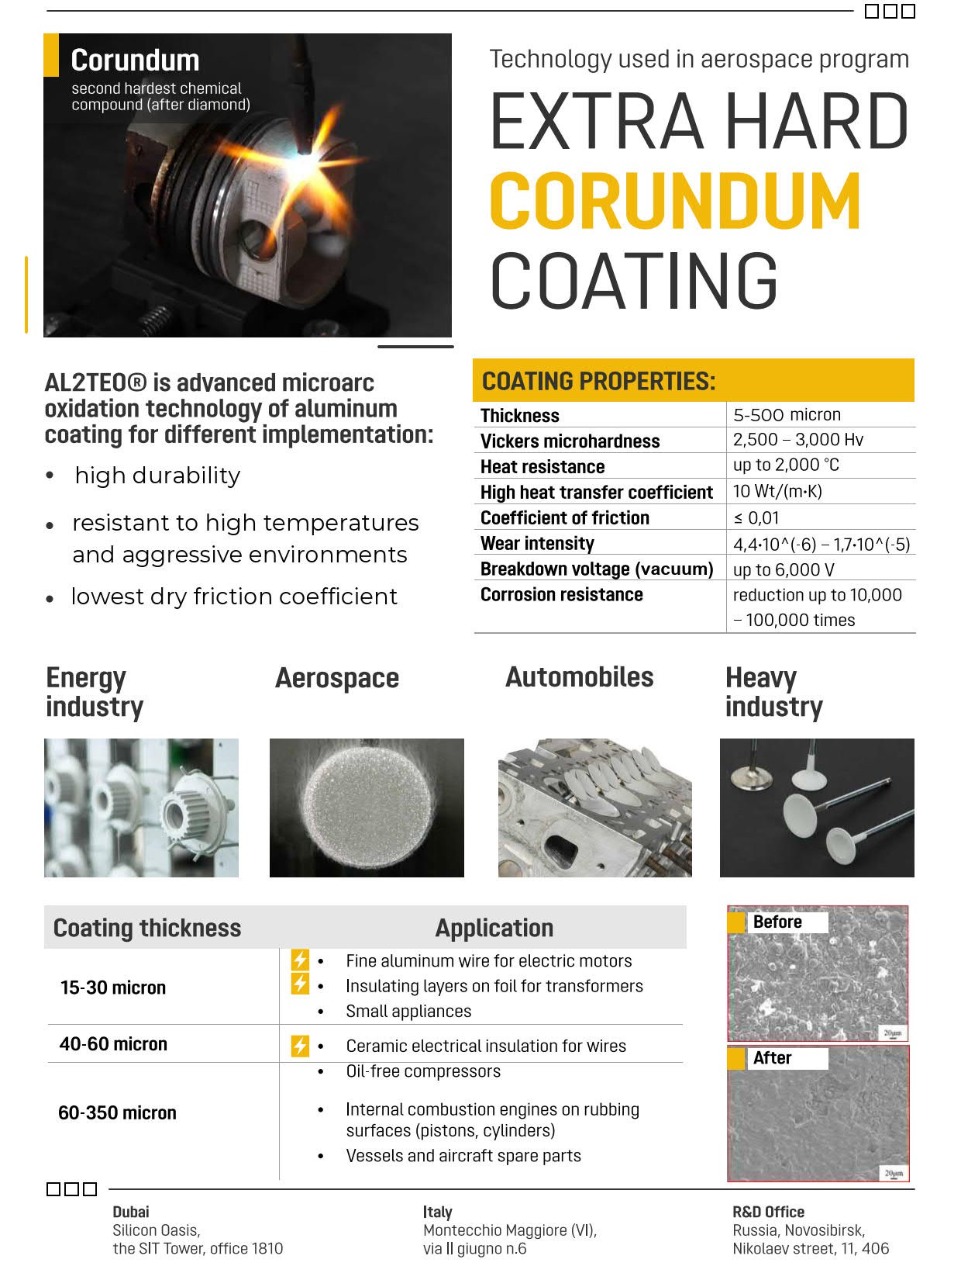 Corundum Coating Of The Piston Group Of Cars, Motorcycles Others